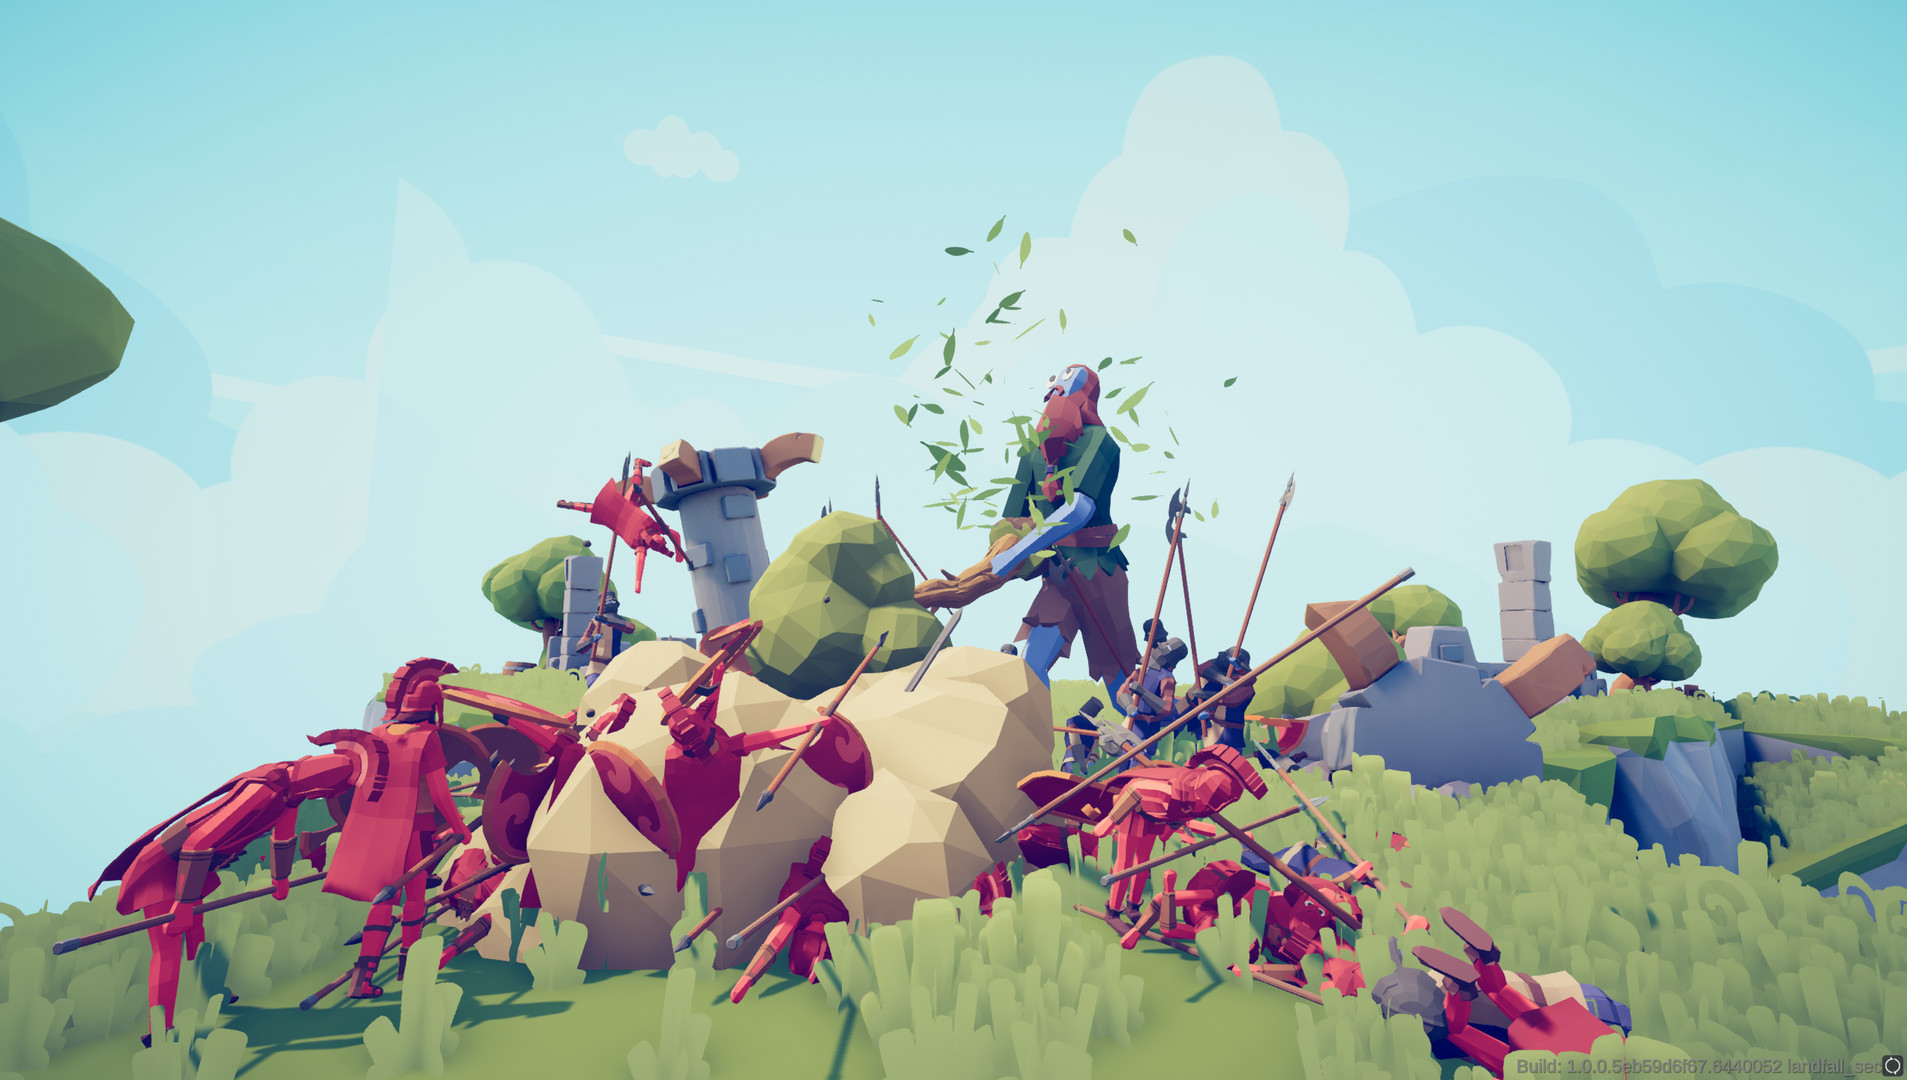 Totally Accurate Battle Simulator is coming to Switch